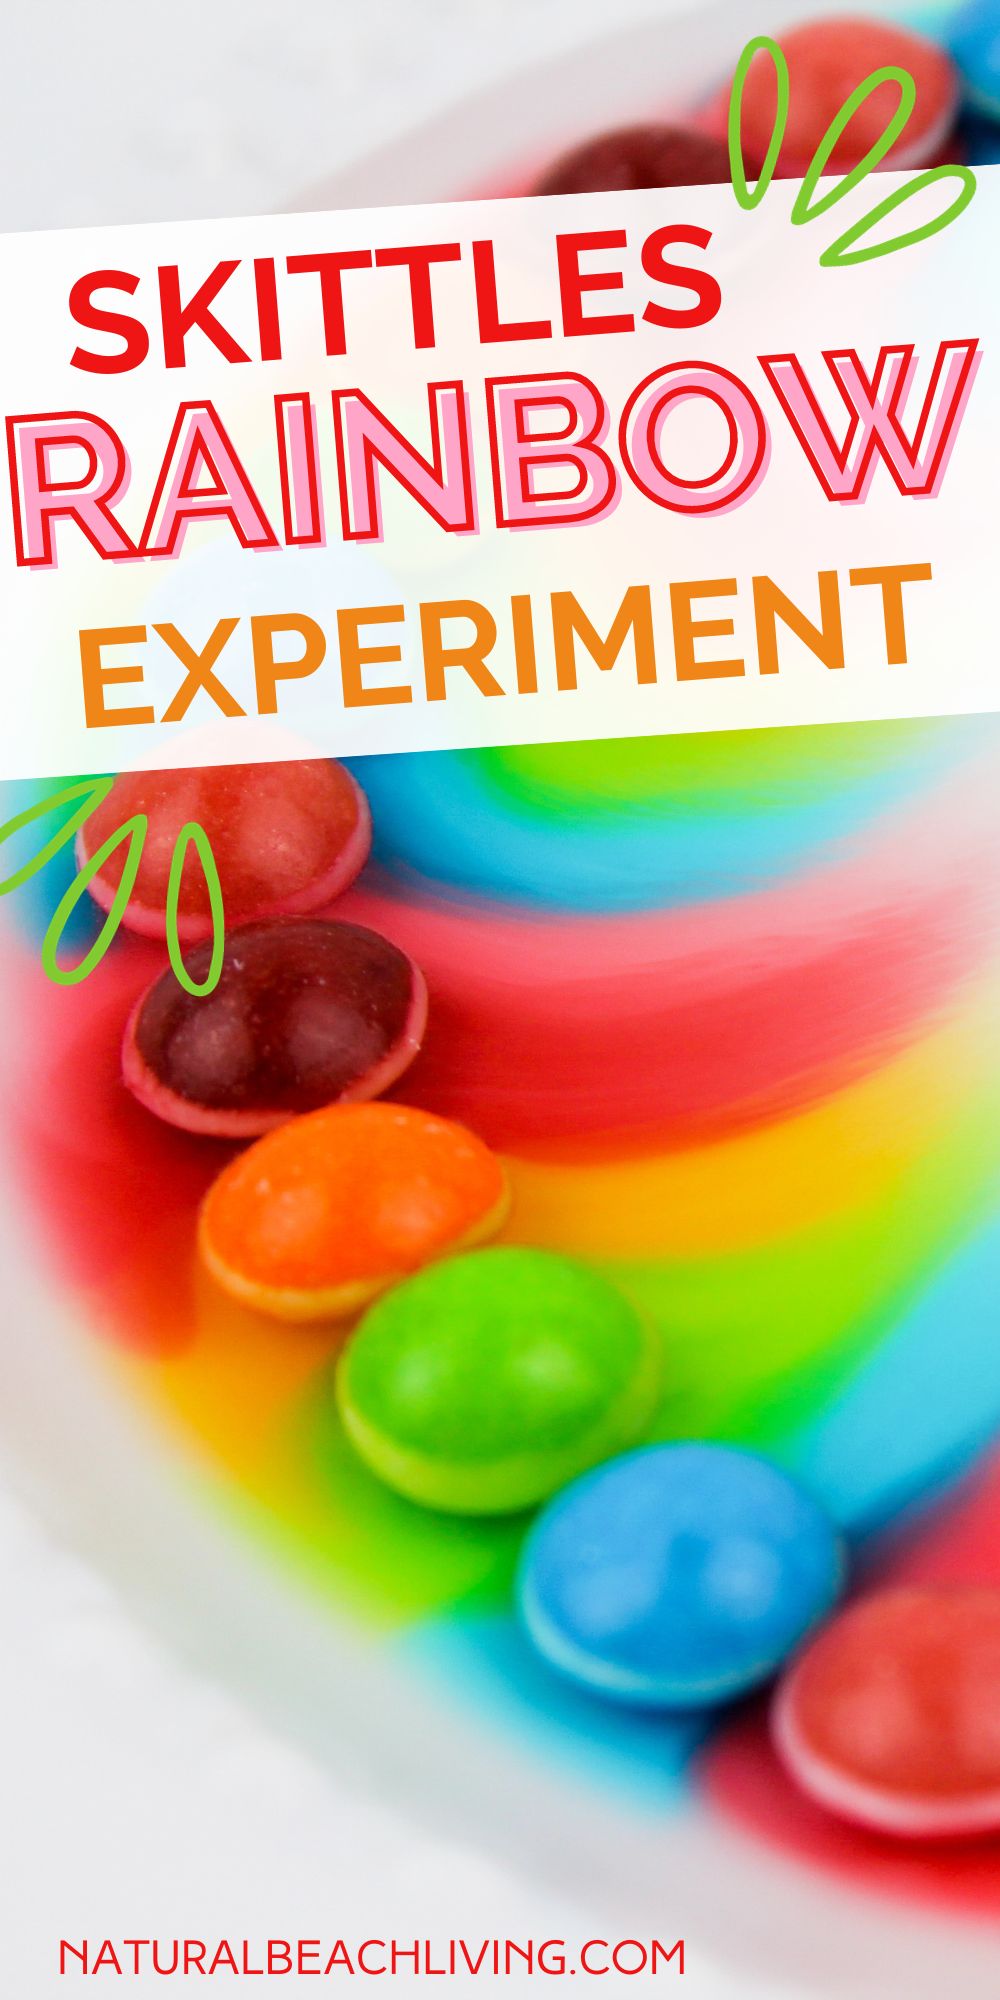 Skittles Rainbow Experiment – Science Activities for Kids